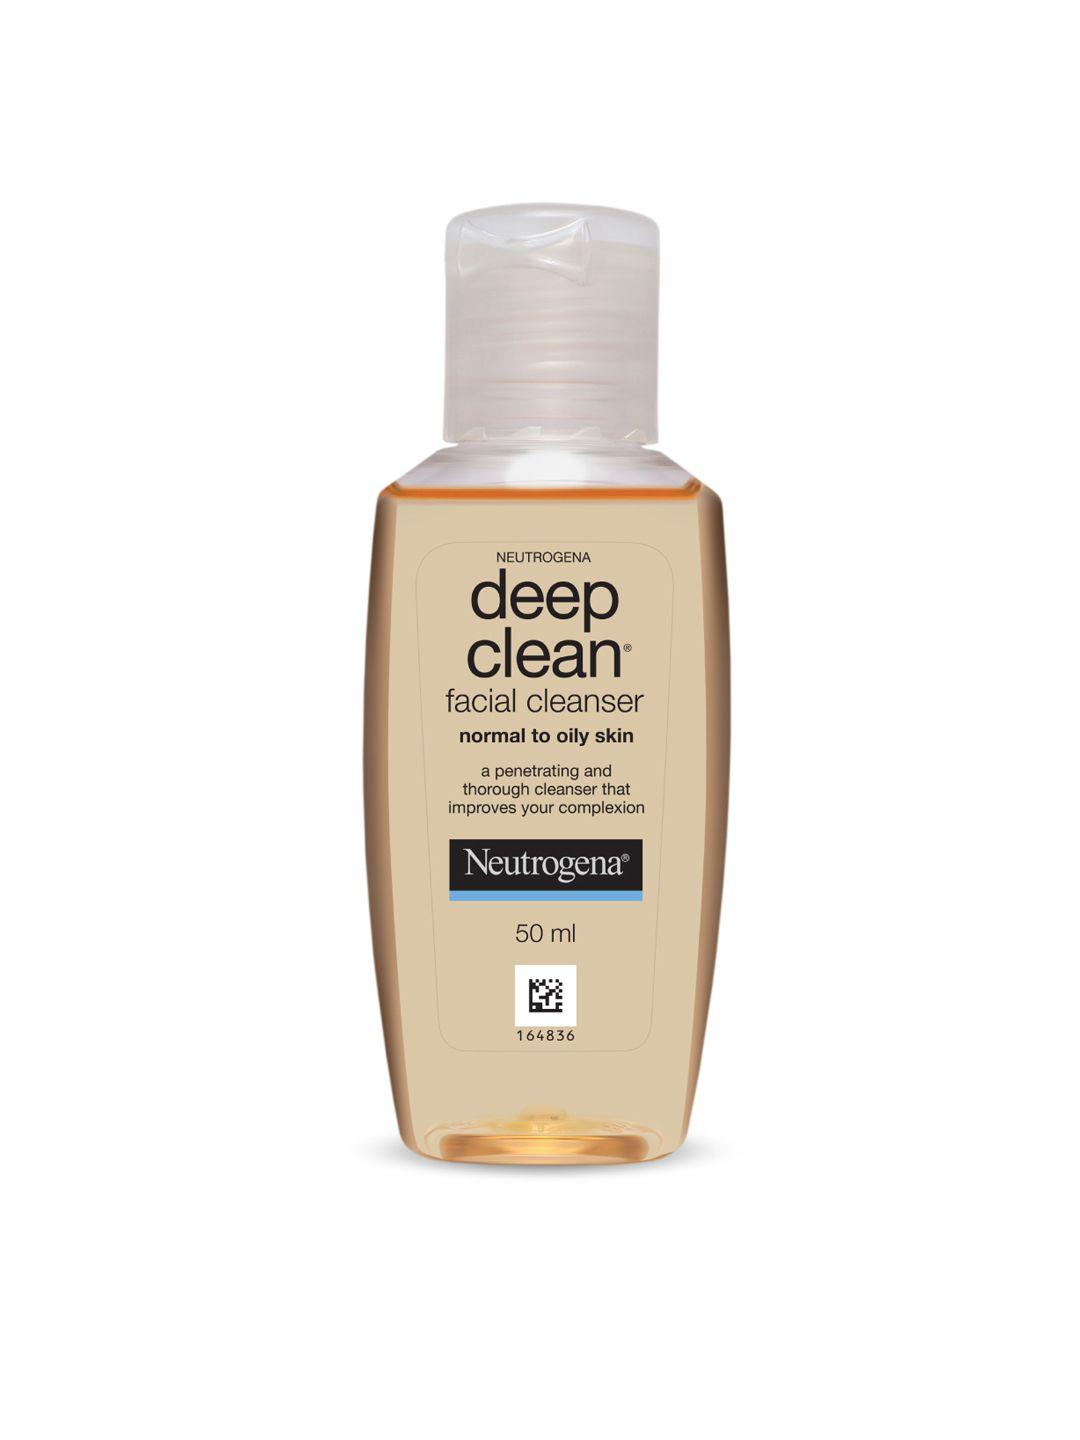 neutrogena deep clean facial cleanser for normal to oily skin - 50 ml